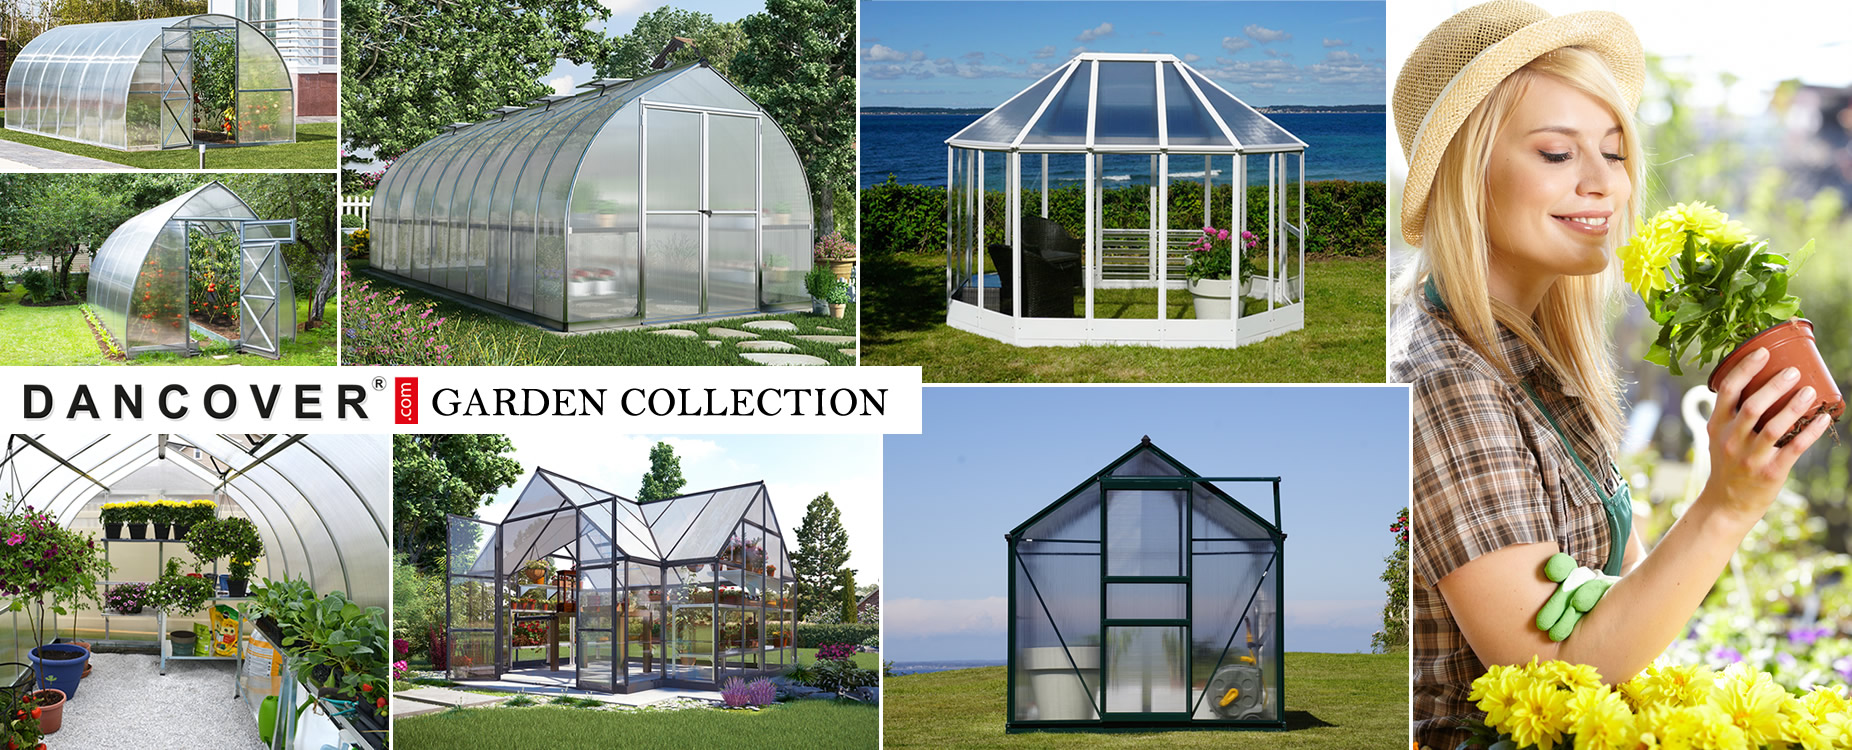 Greenhouses from Dancover